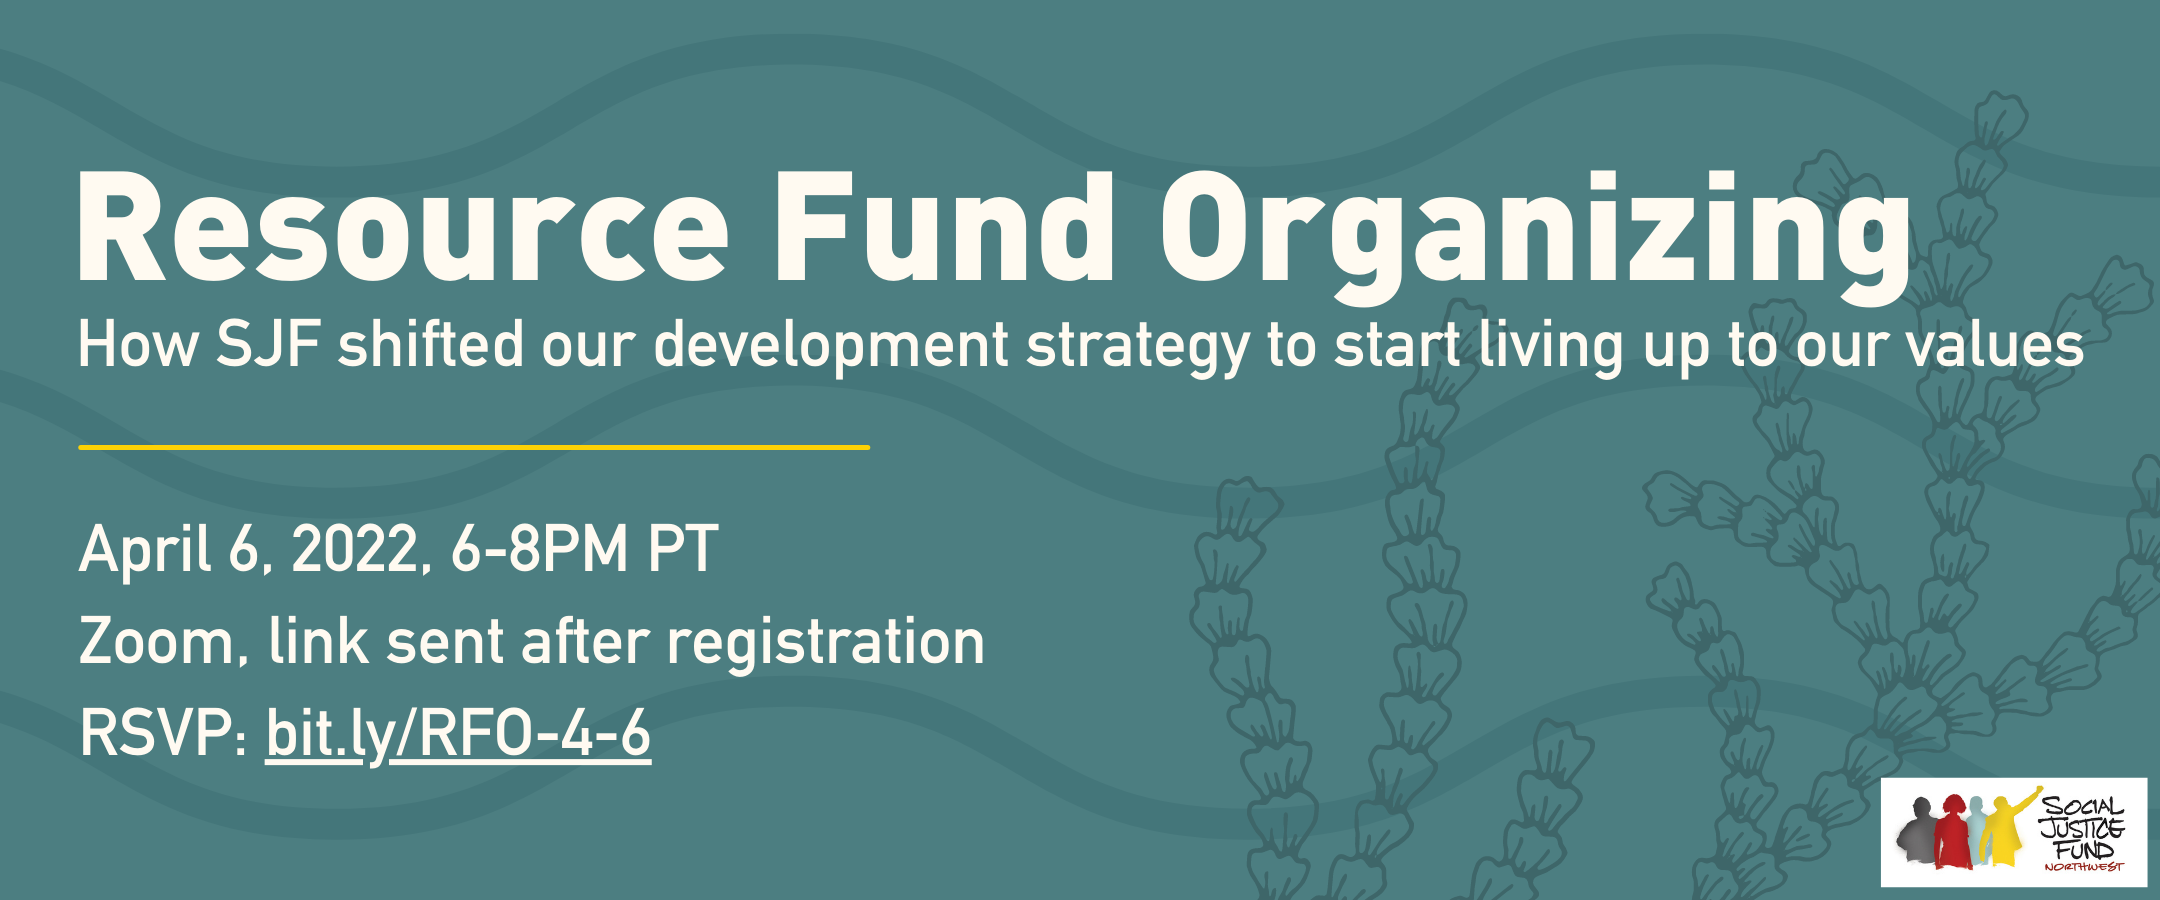 Rectangular banner with teal background and images of coral and waves. White text reads Resource Fund Organizing. How SJF shifted our development strategy to start living up to our values. Wednesday April 6. 6 to 8 pm. RSVP. 